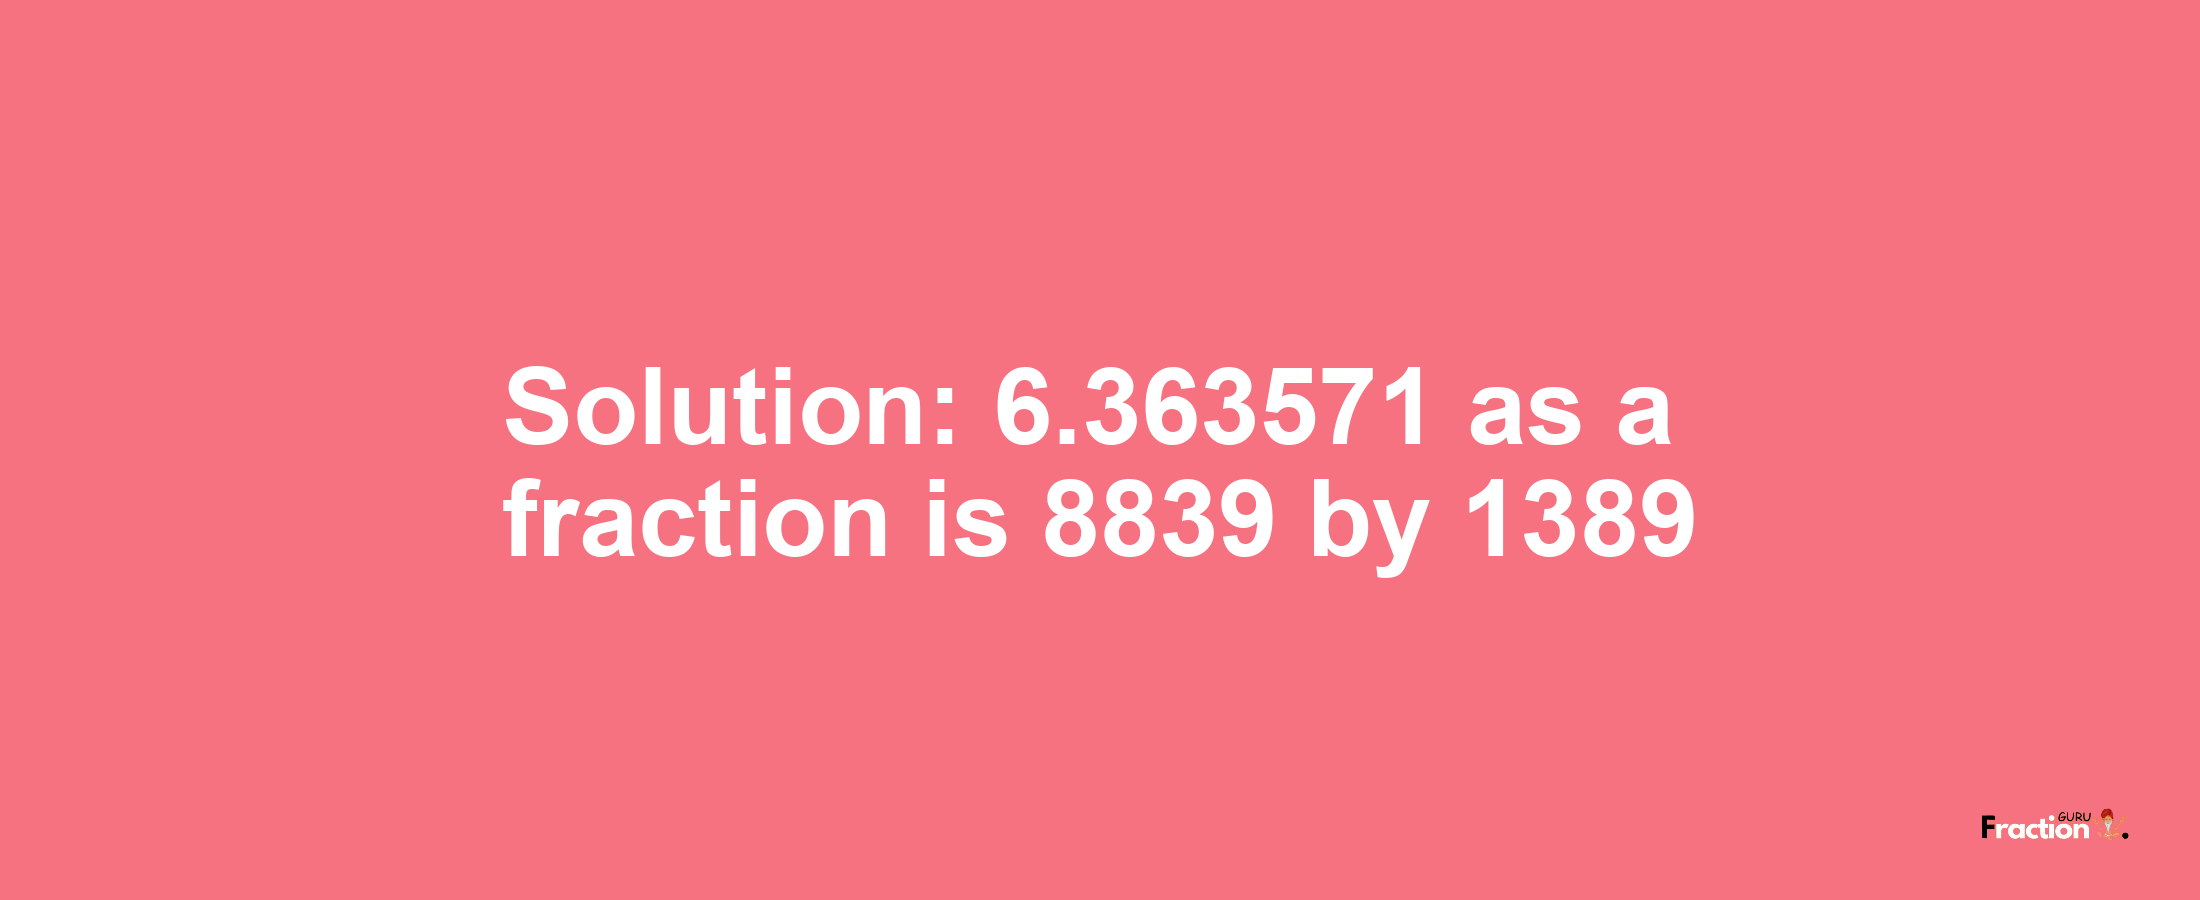 Solution:6.363571 as a fraction is 8839/1389